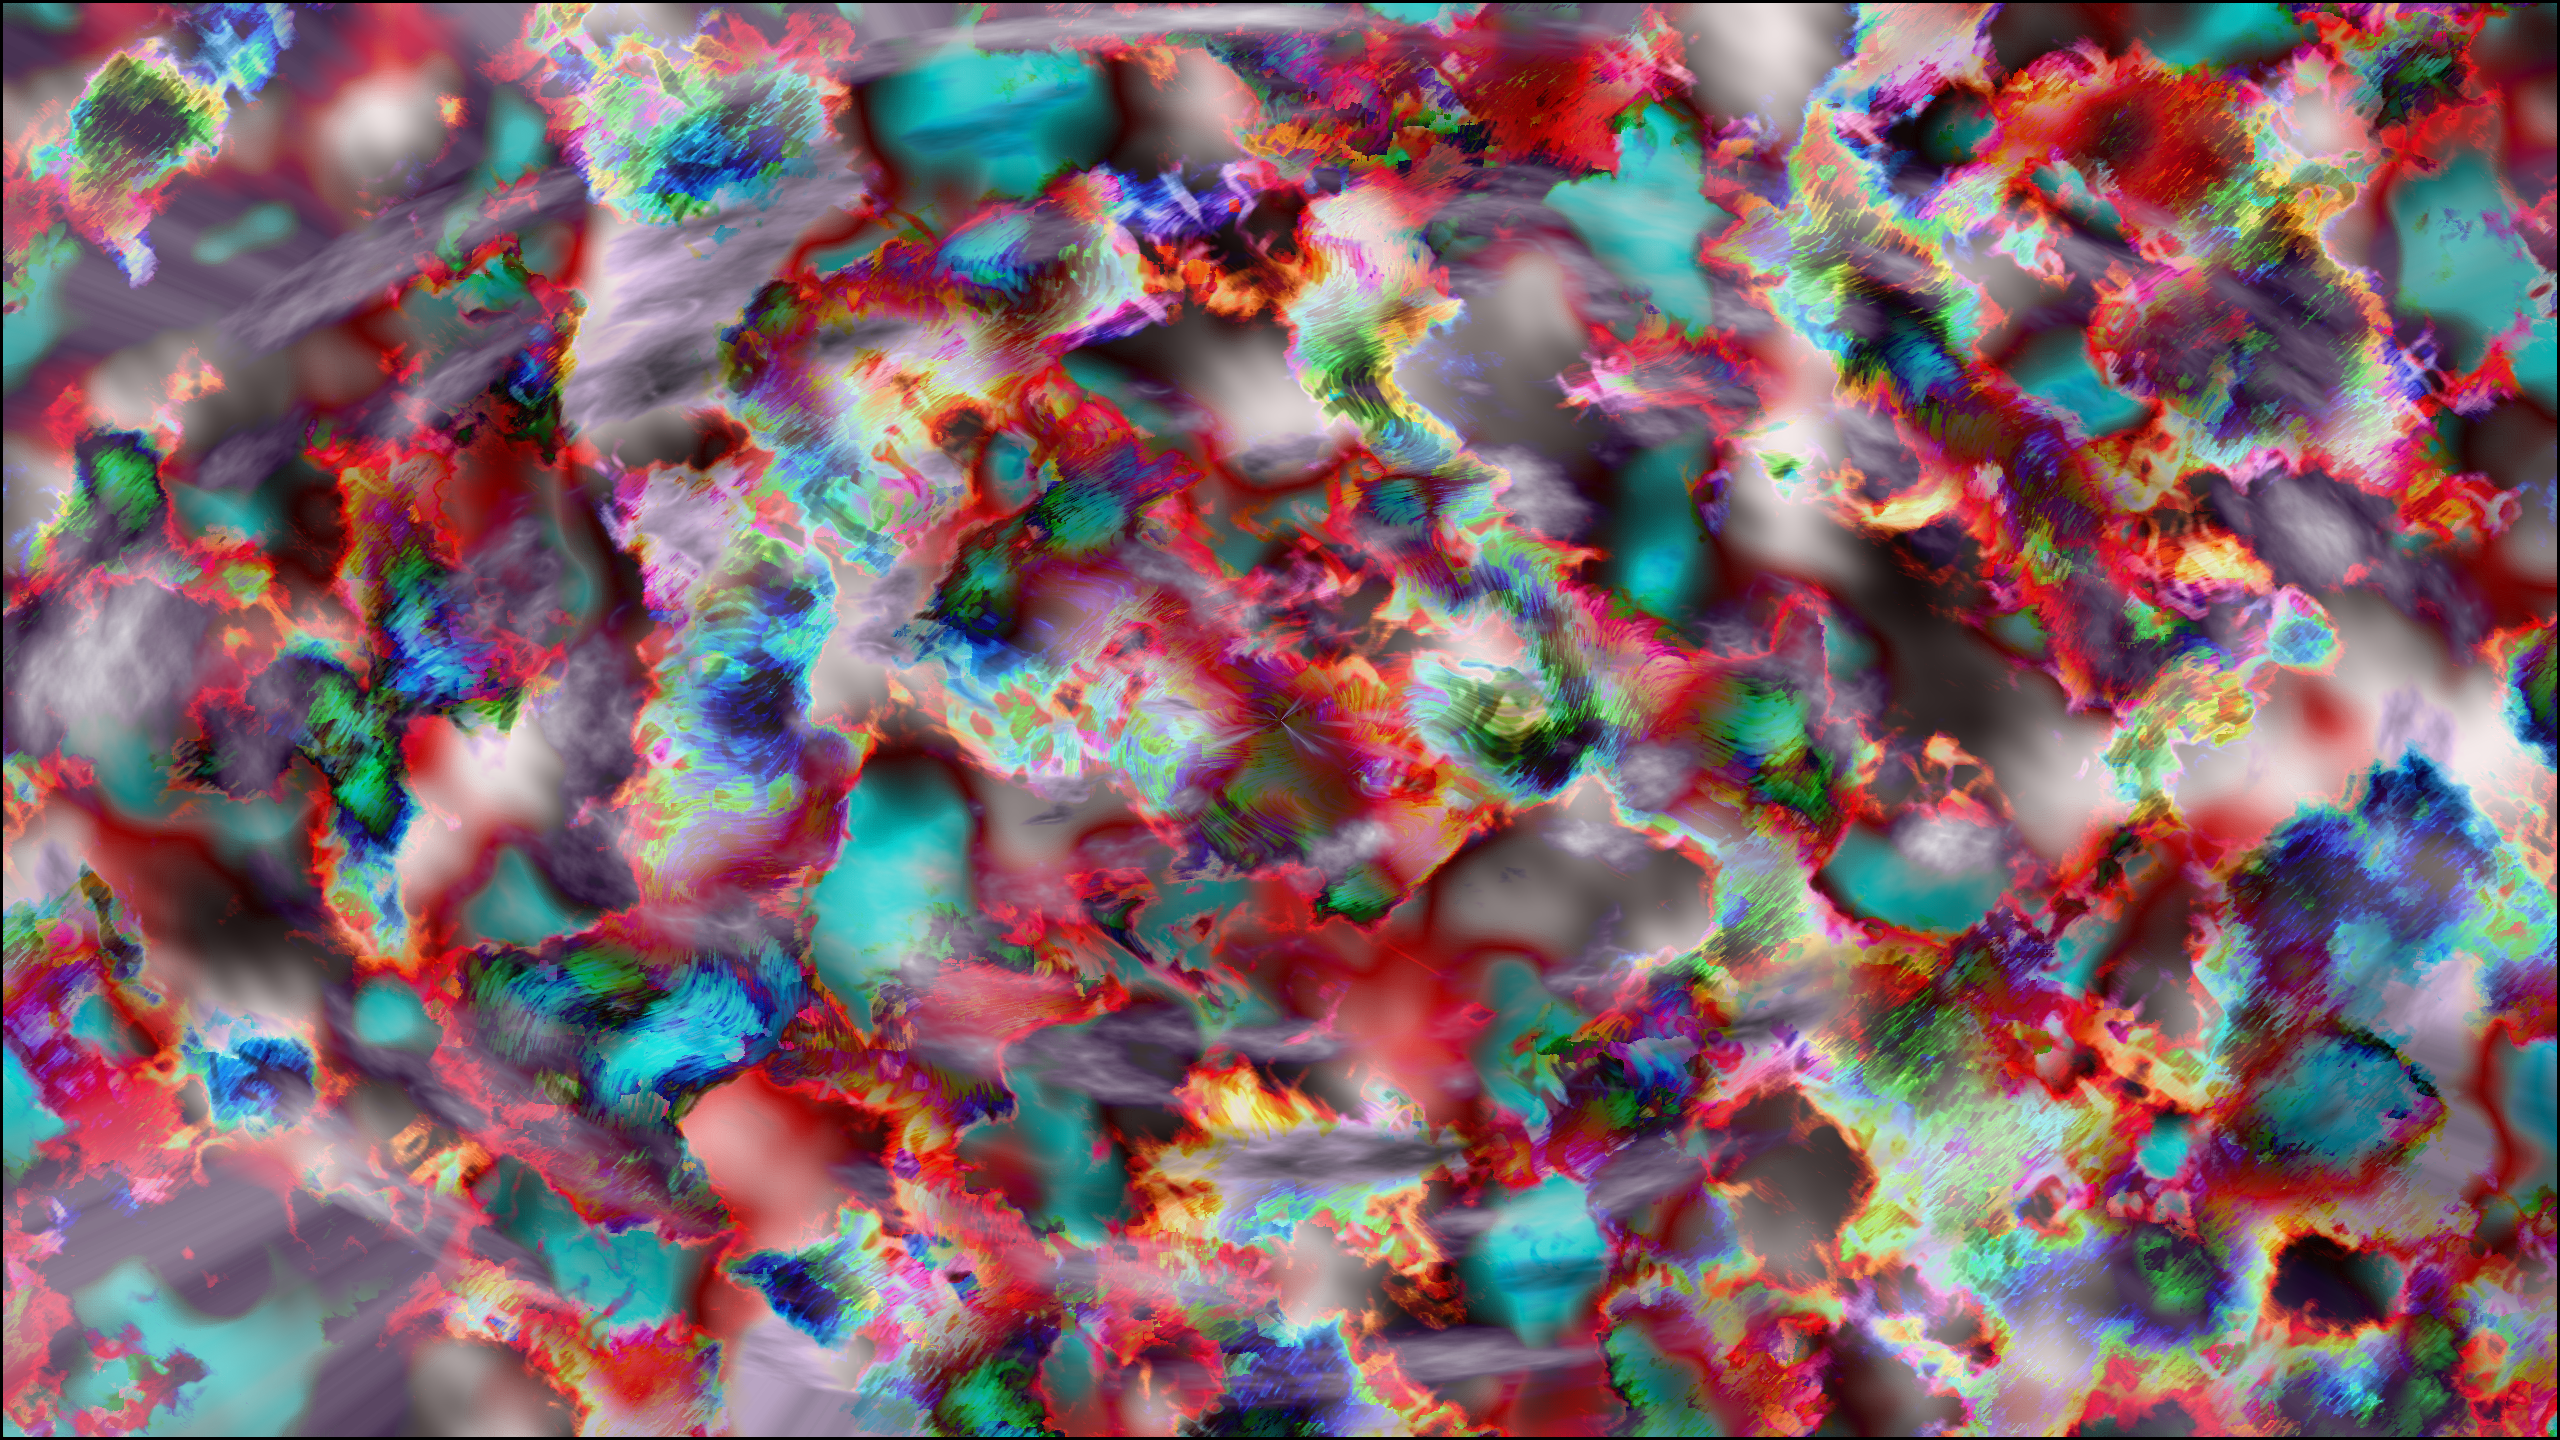 Brightness Digital Art Abstract Trippy Psychedelic 2560x1440